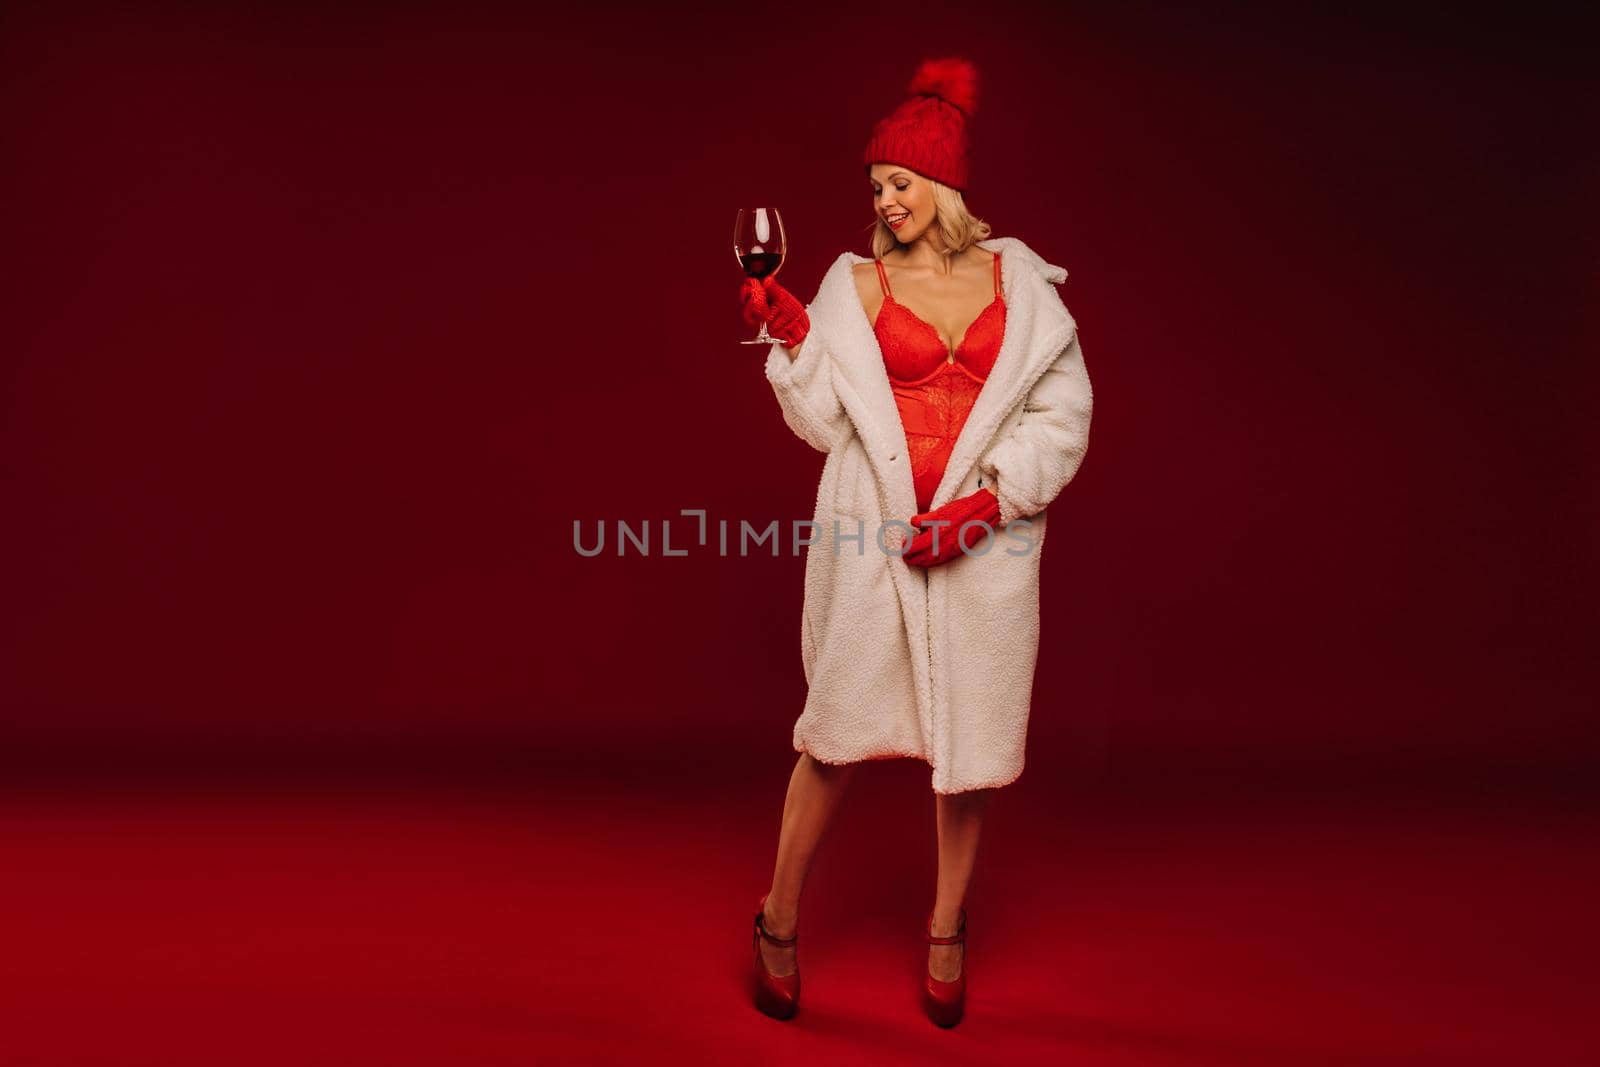 portrait of a smiling girl in a white fur coat and underwear holding a glass of champagne on a red background.